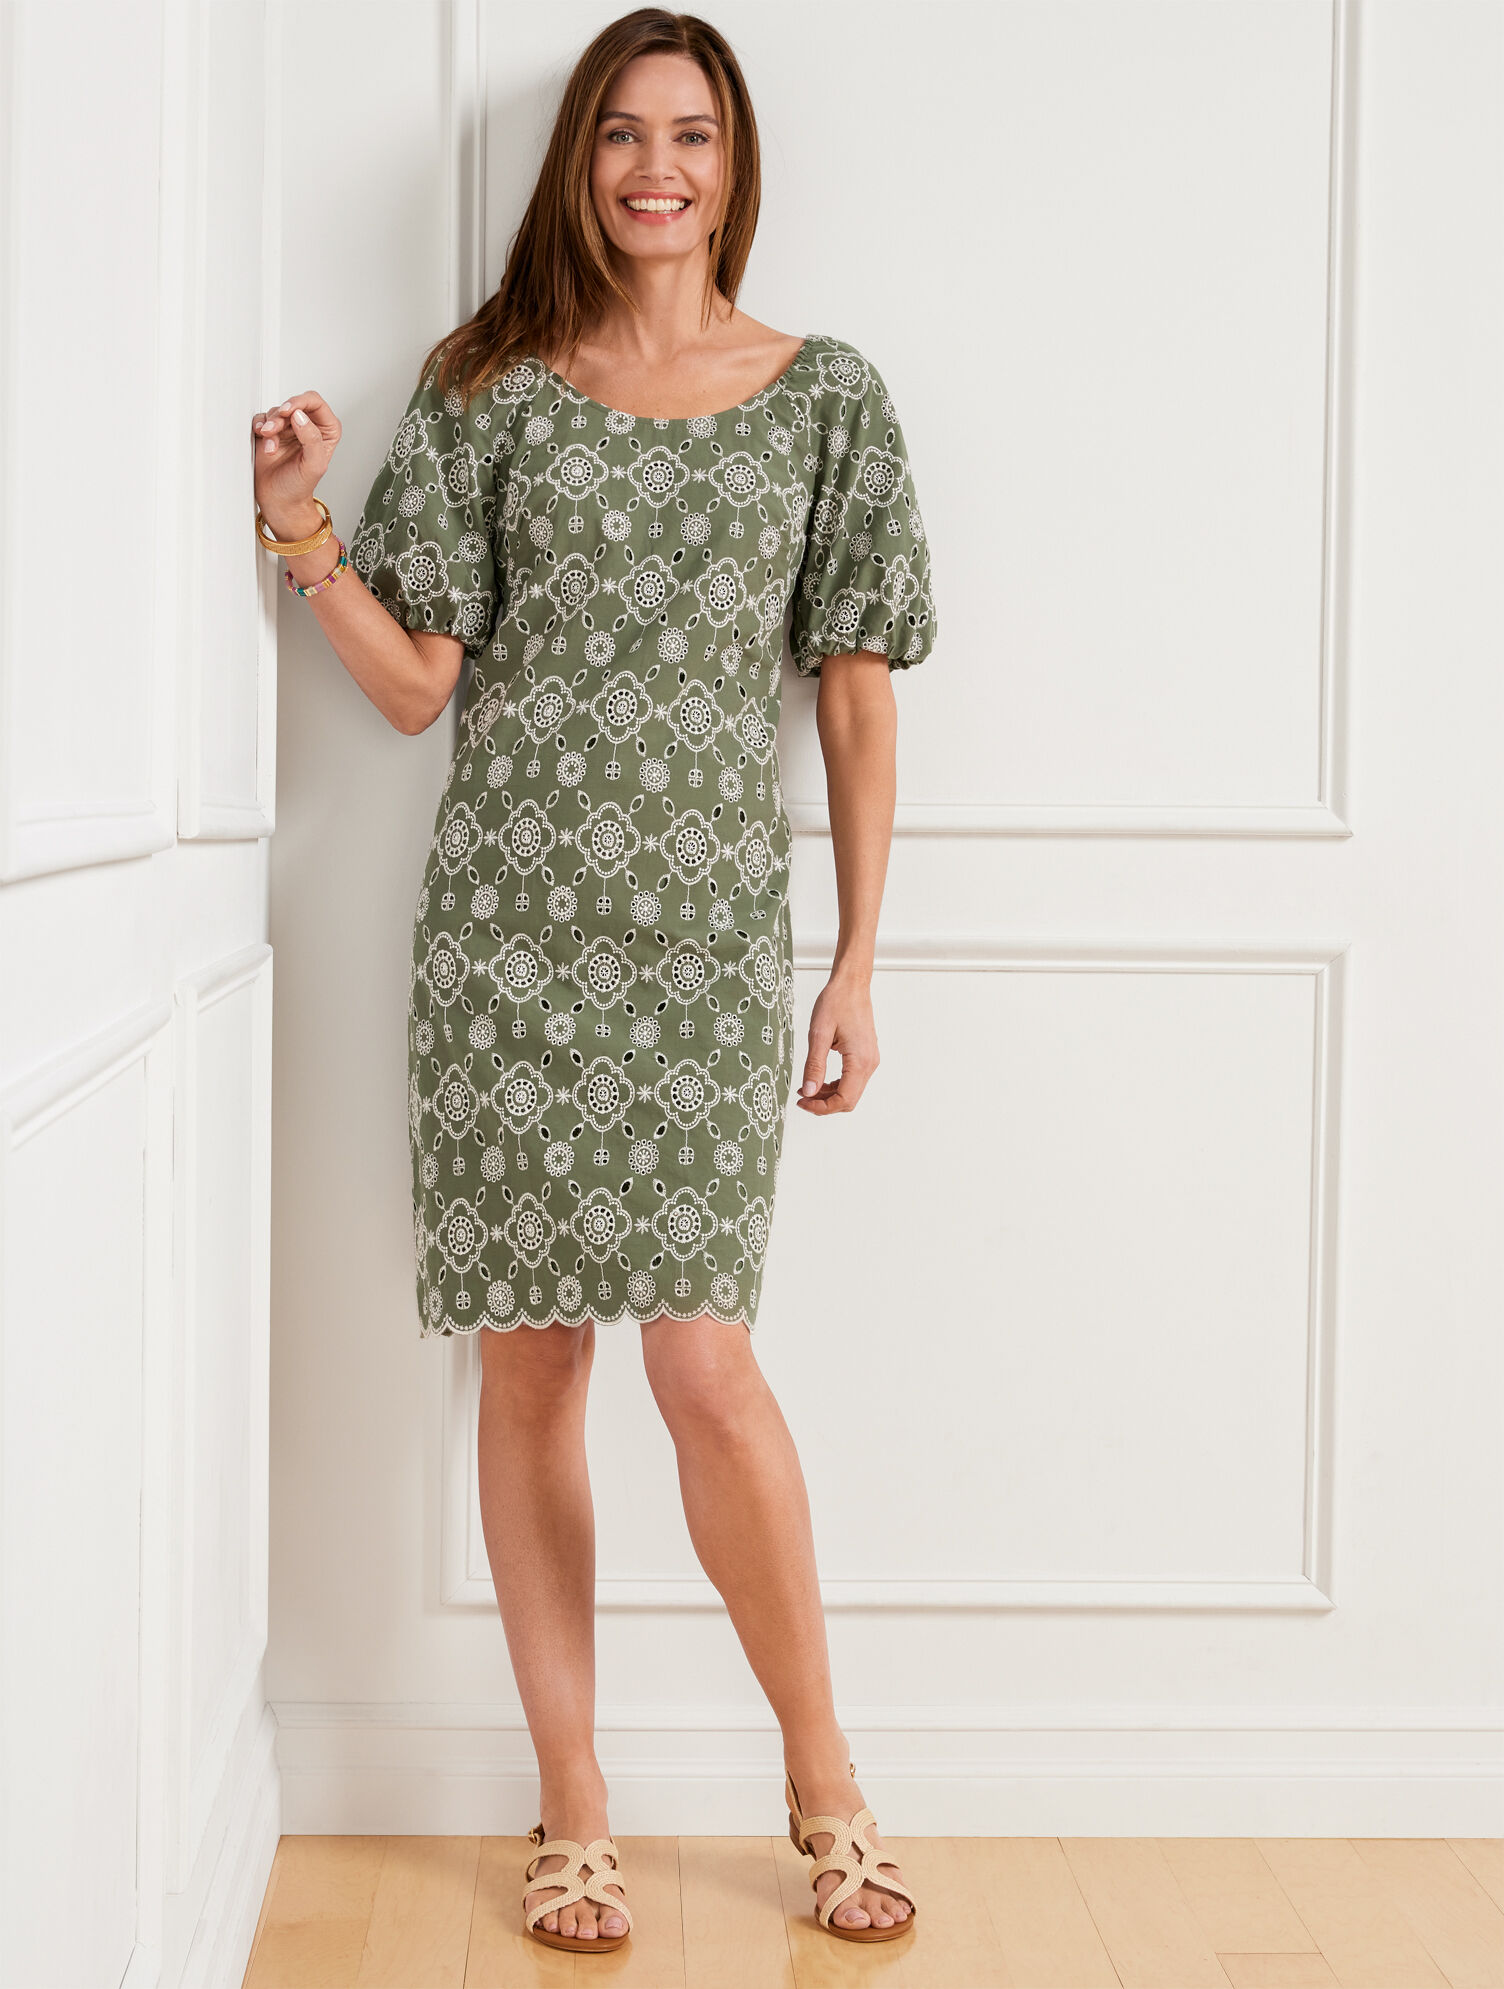 Puff Sleeve Embroidered Shift Dress - Spring Moss/White - 6 - 100% Cotton Talbots